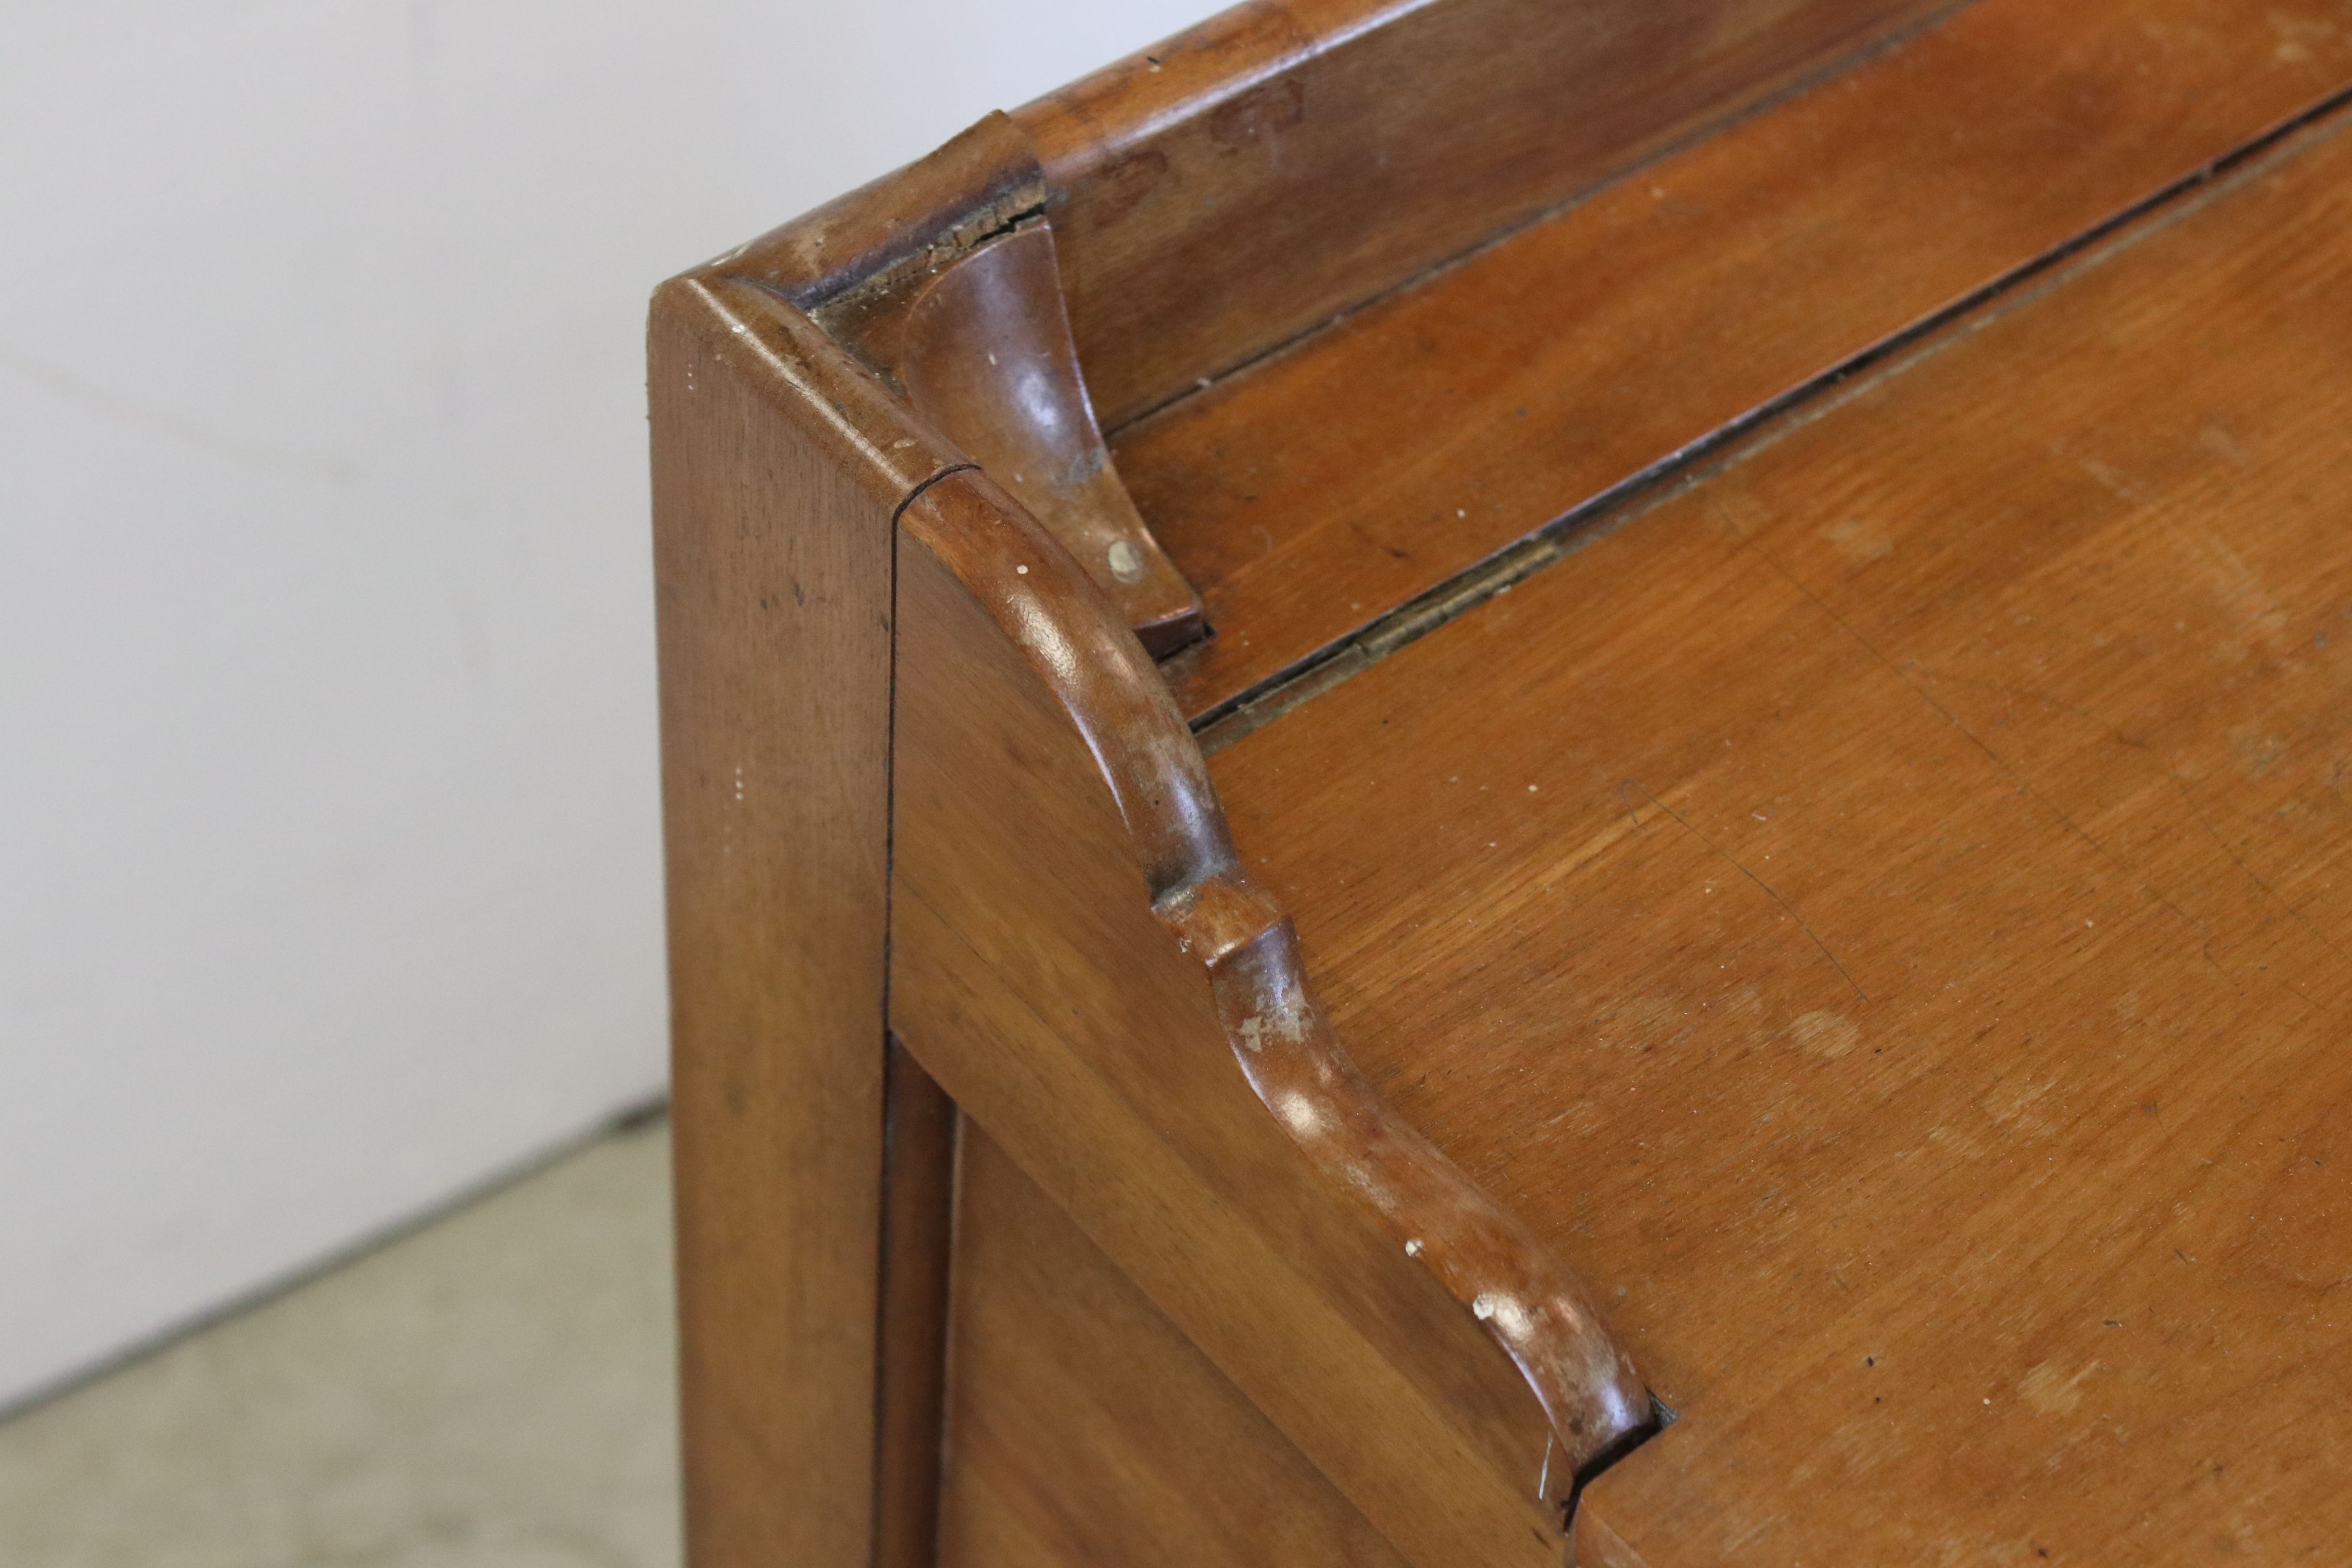 Victorian Walnut Box Seat Commode, with hinged lid above a hinged seat, raised on a turned legs with - Image 6 of 6